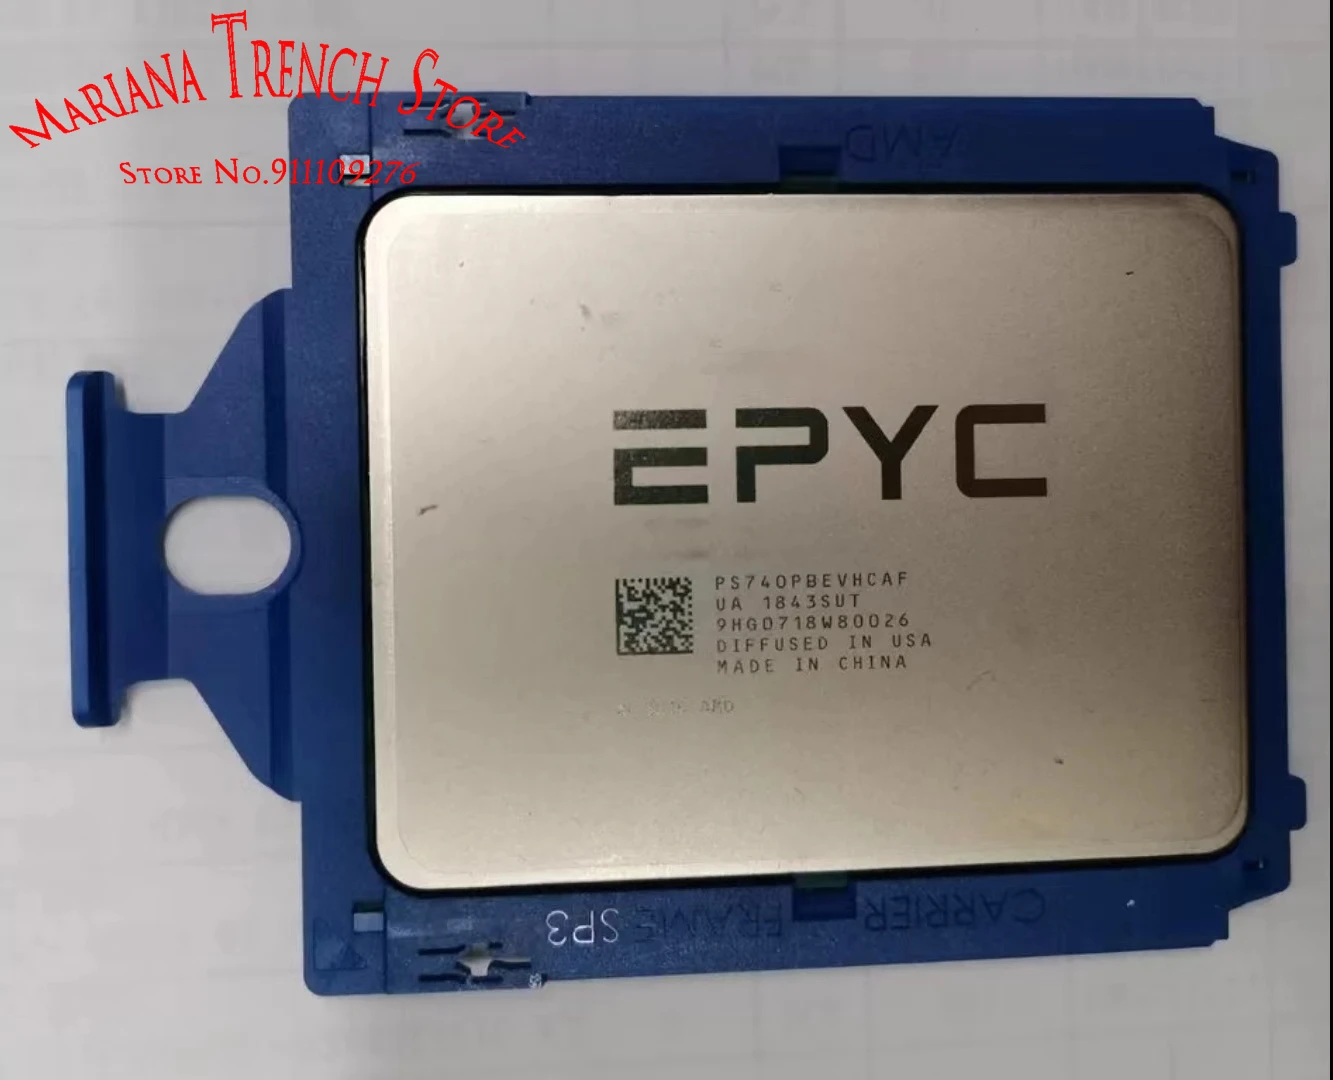 

Processor for EPYC 7401P 24 Cores 48 Threads Base Clock 2.0GHz Max.Boost Up to 3.0GHz L3 Cache 64MB TDP 155/170W